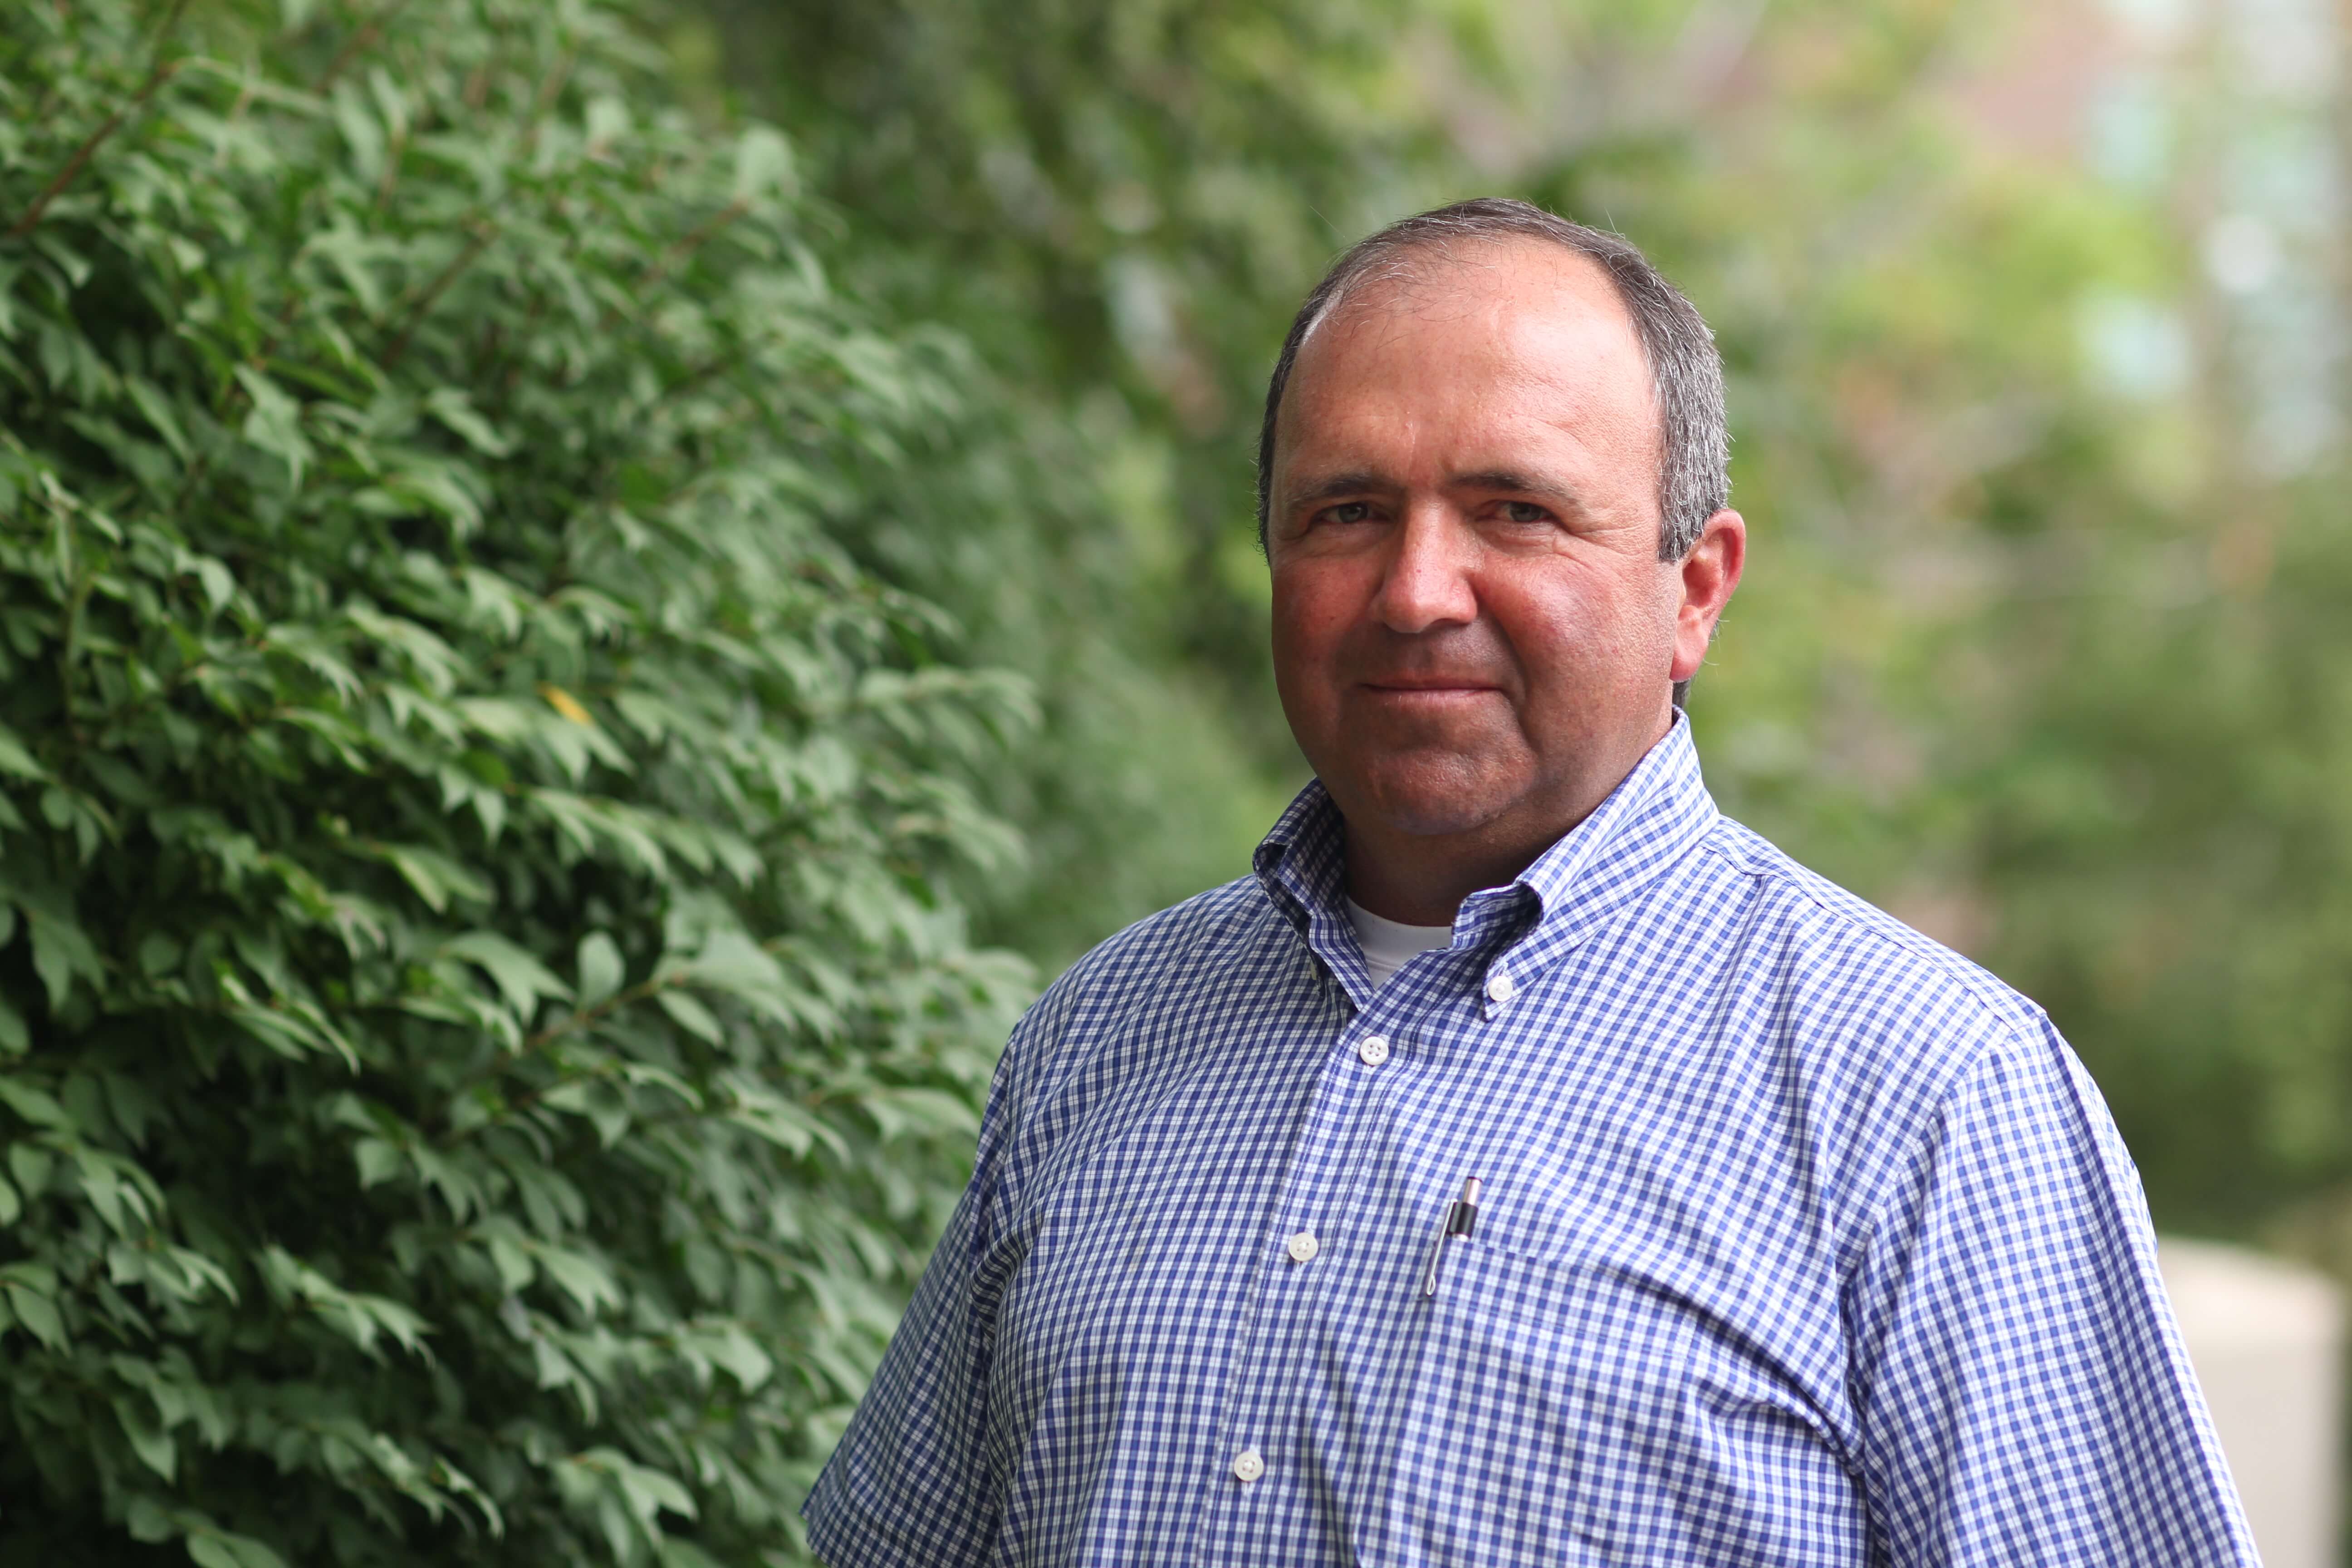 Lucero Joins Certified Hereford Beef as Regional Brand Manager